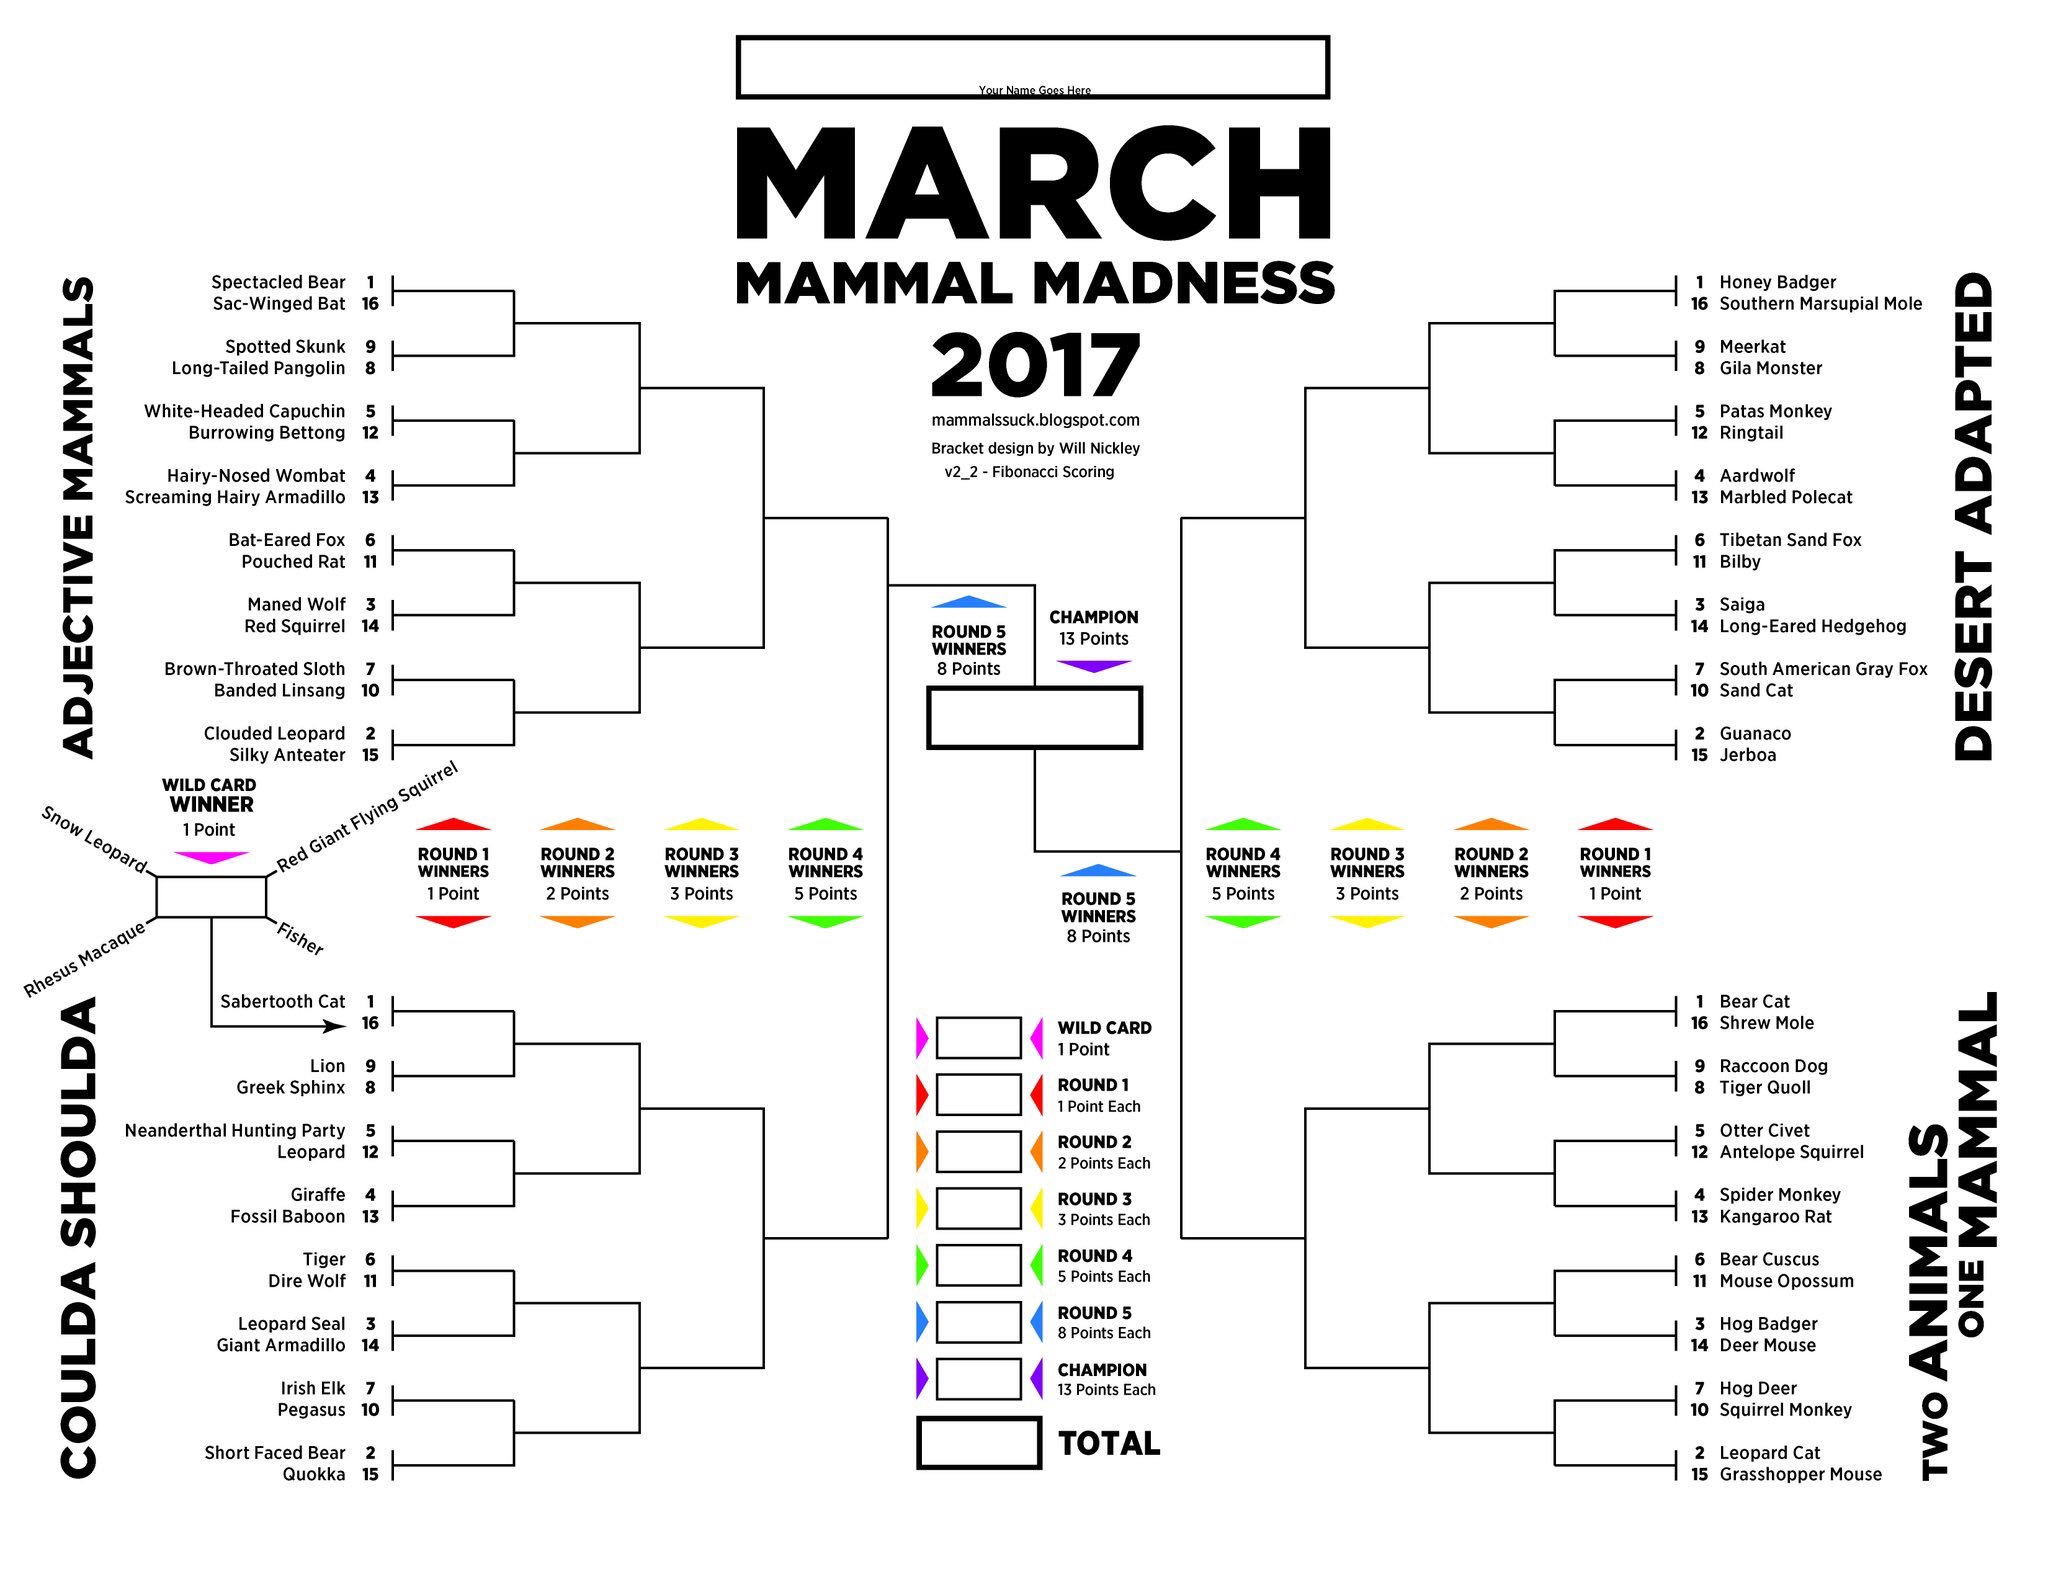 Mammals ‘Battle’ For Greatness In March Madness For Science Nerds